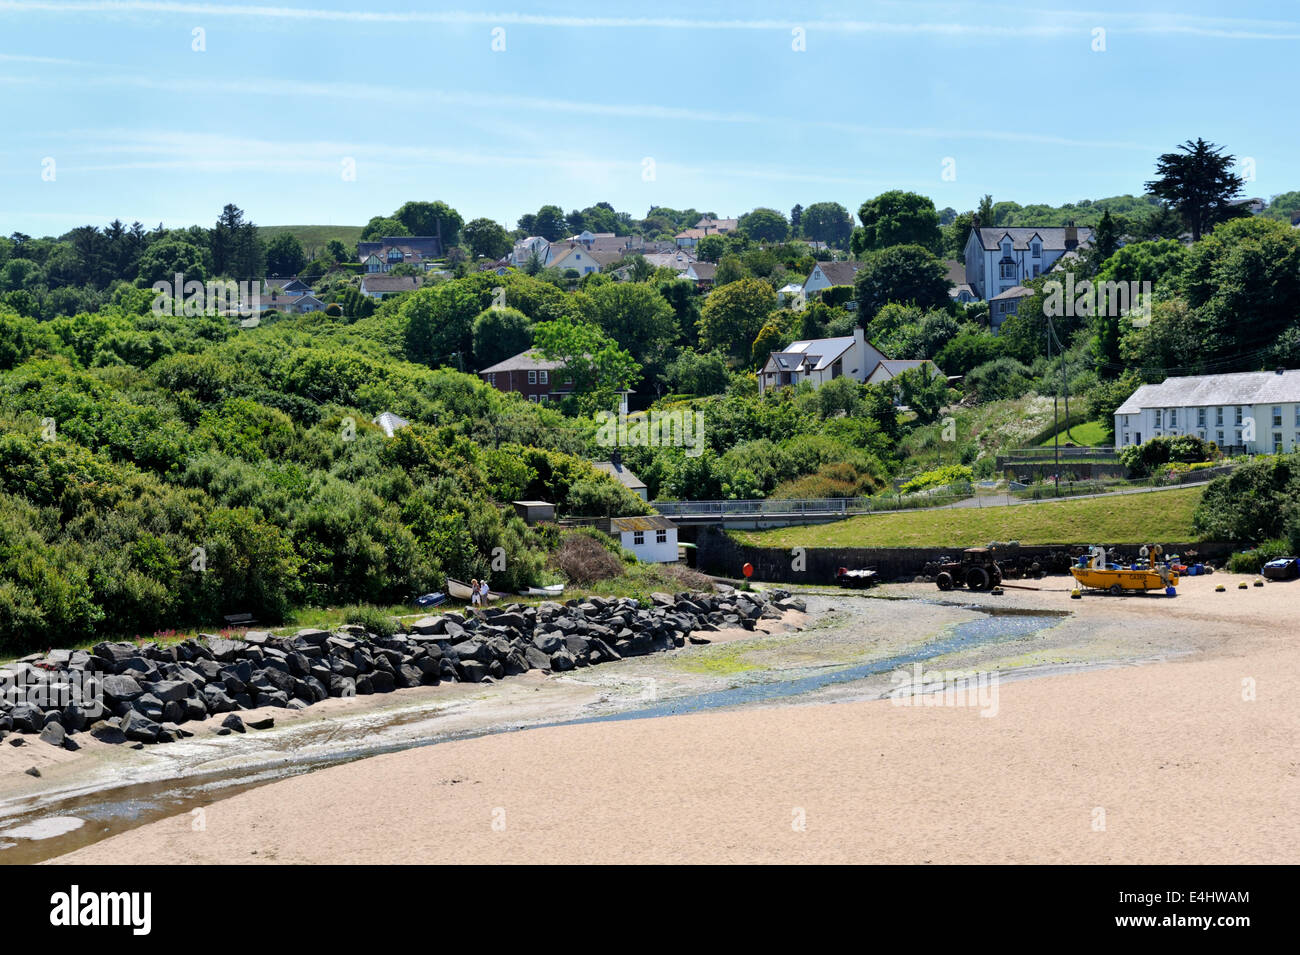 Village of Aberporth with river Nant Howni, Pembrokeshire, Wales, UK Stock Photo